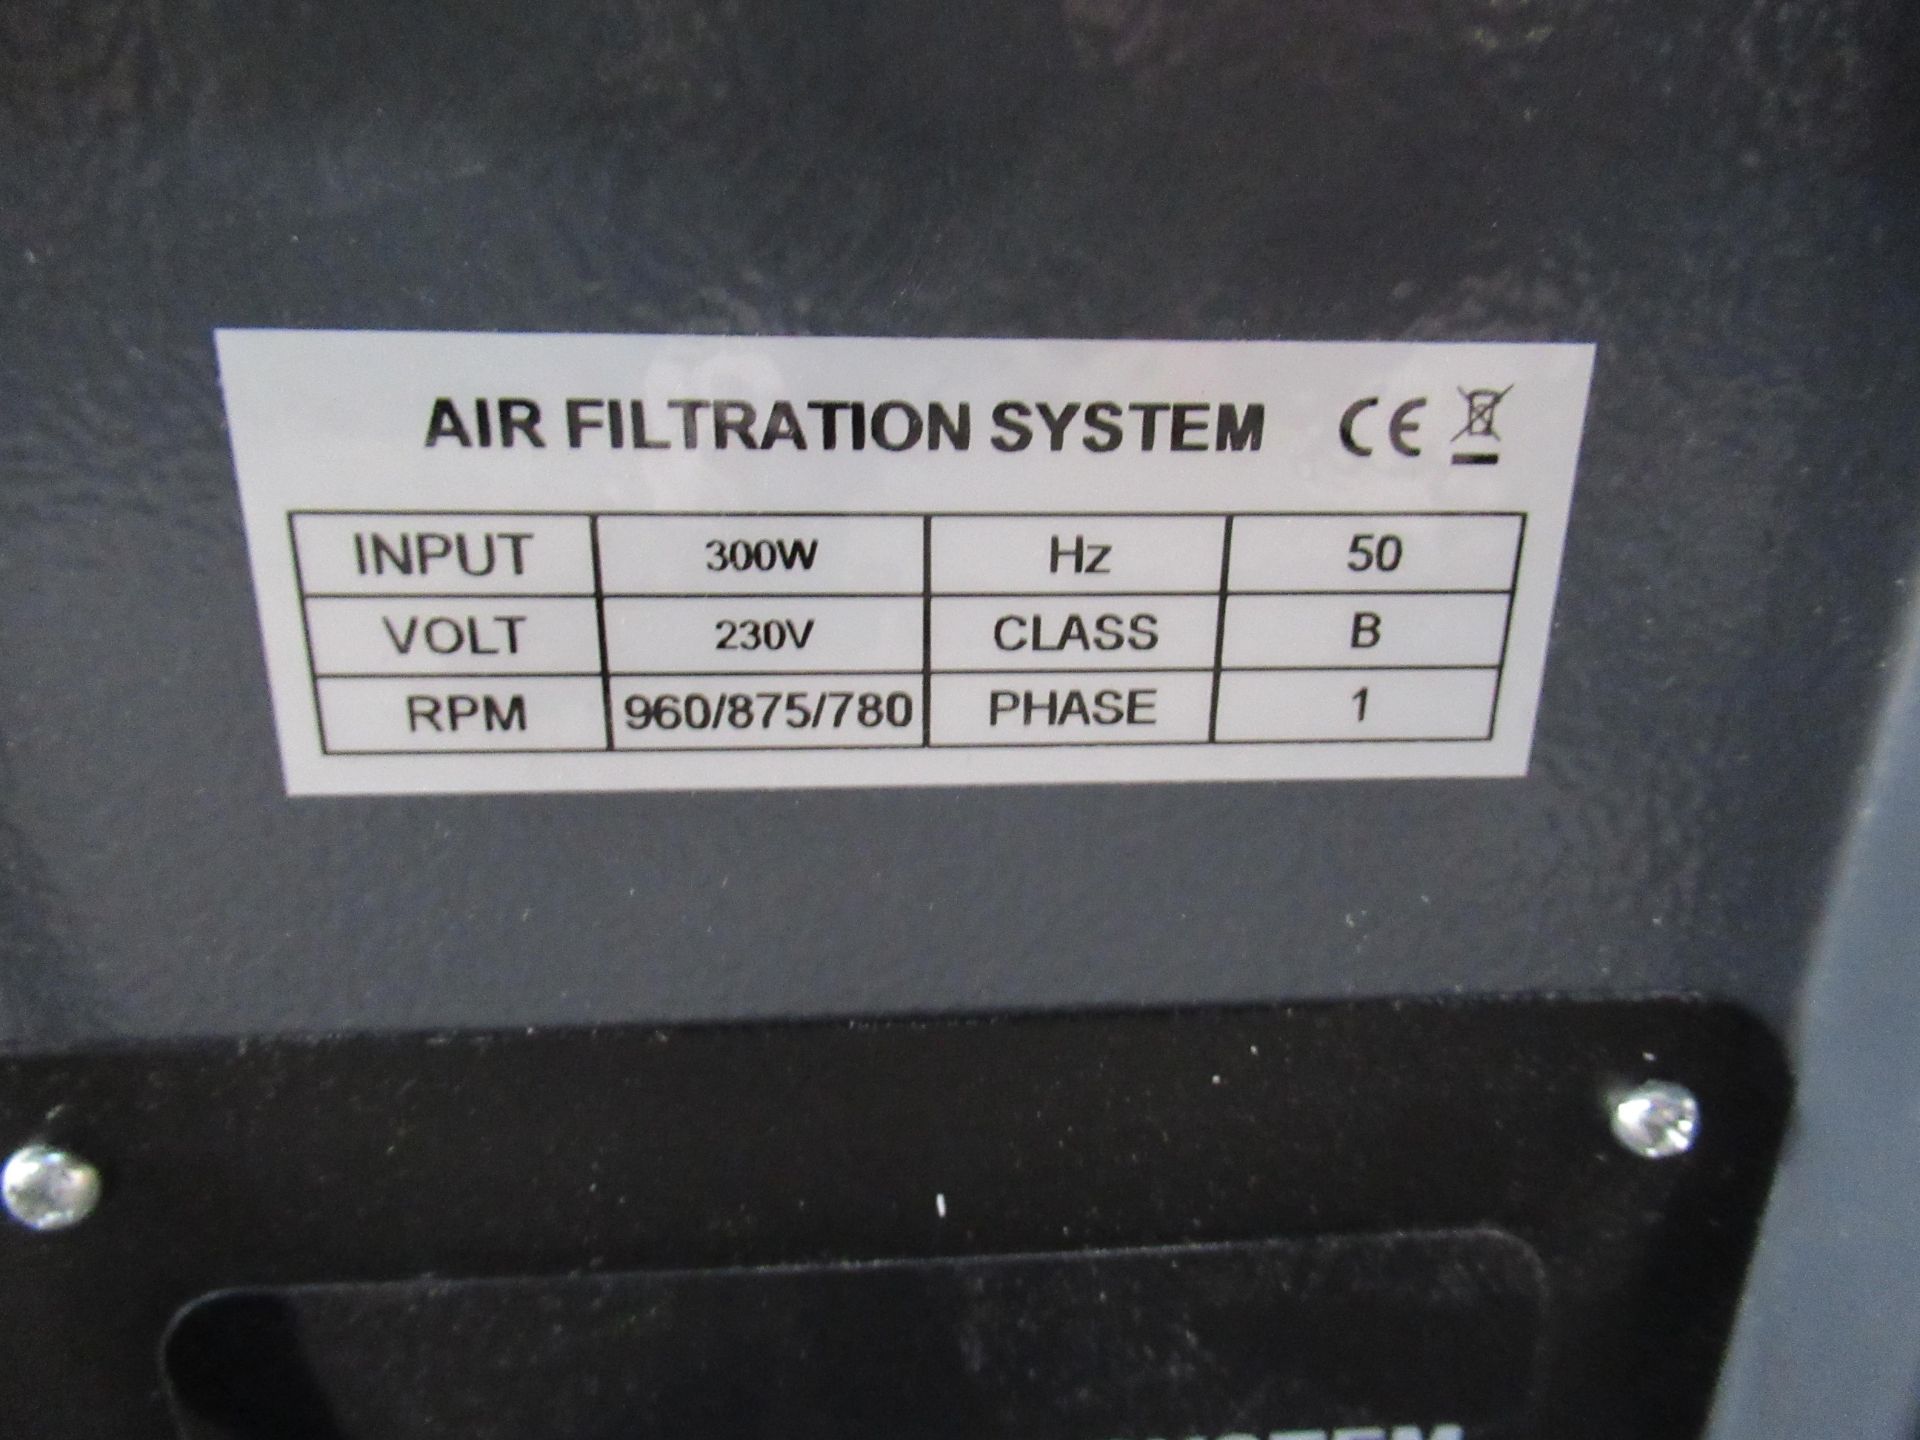 iTech air filtration system, 230V, Class 8 - Image 3 of 3